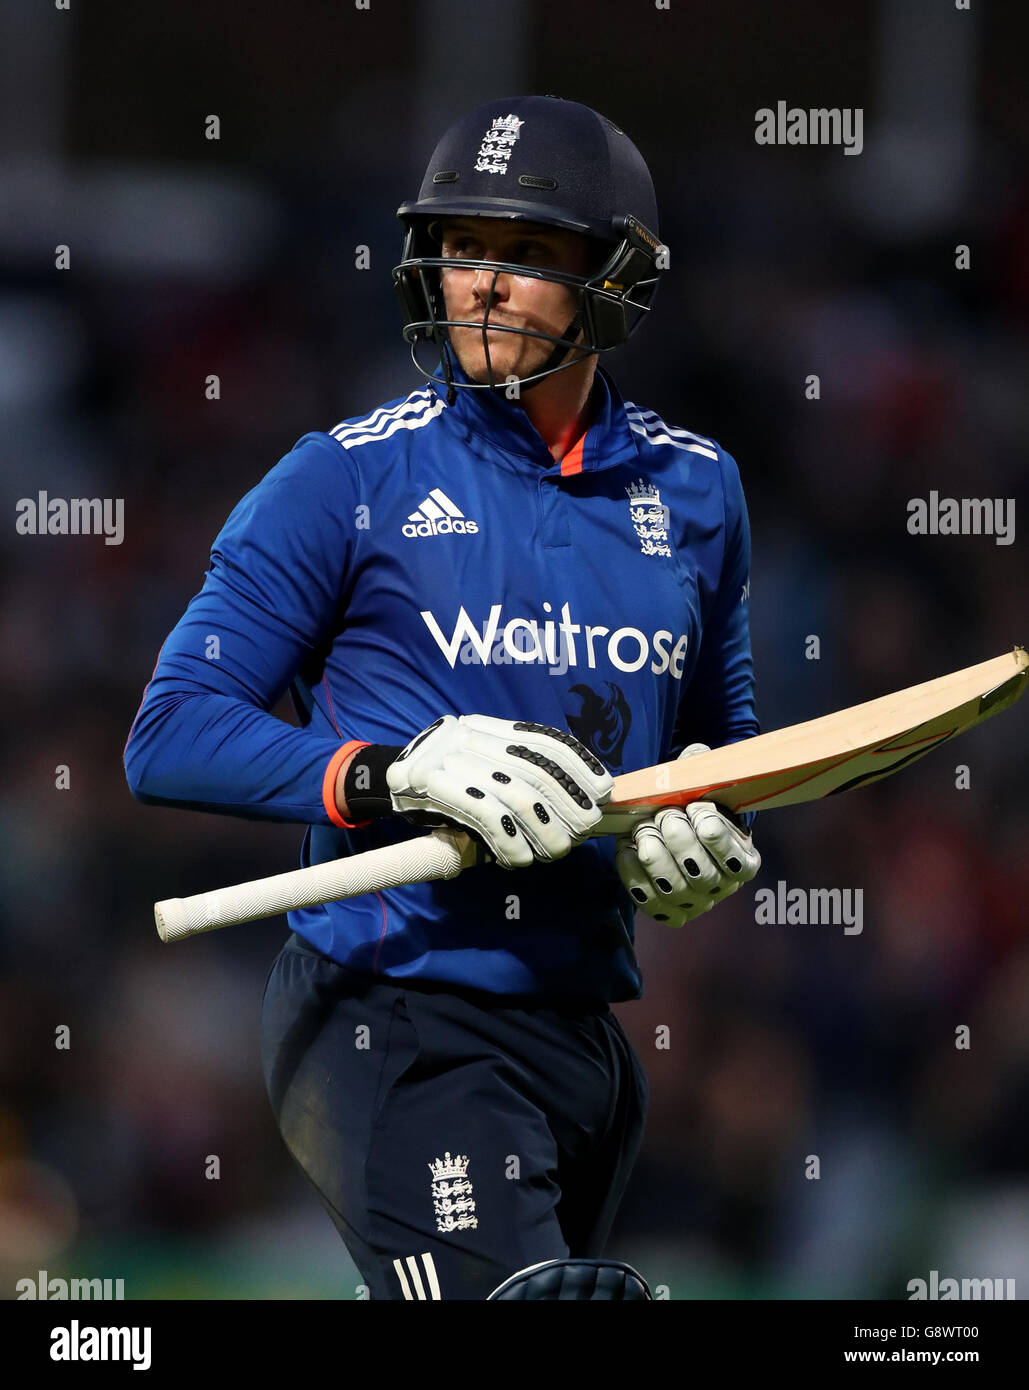 England's Jason Roy walks after being dismissed by Sri Lanka's Nuwan Pradeep during the Royal London One Day International Series at the Kia Oval, London. Stock Photo